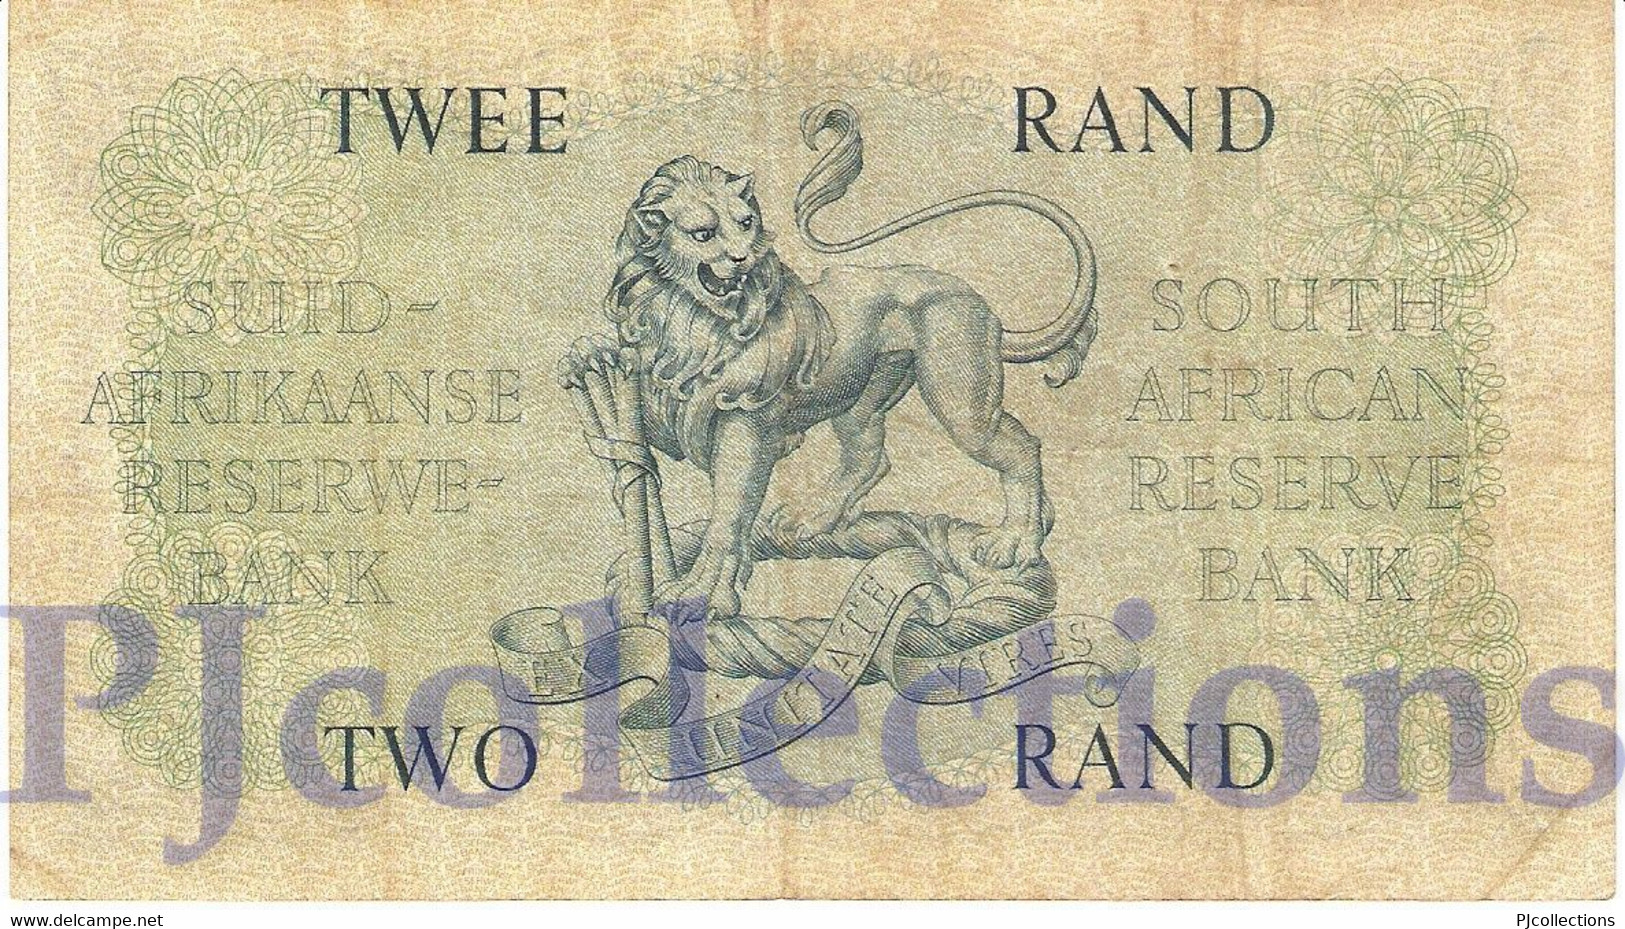 SOUTH AFRICA 2 RAND 1961 PICK 104a VF - South Africa